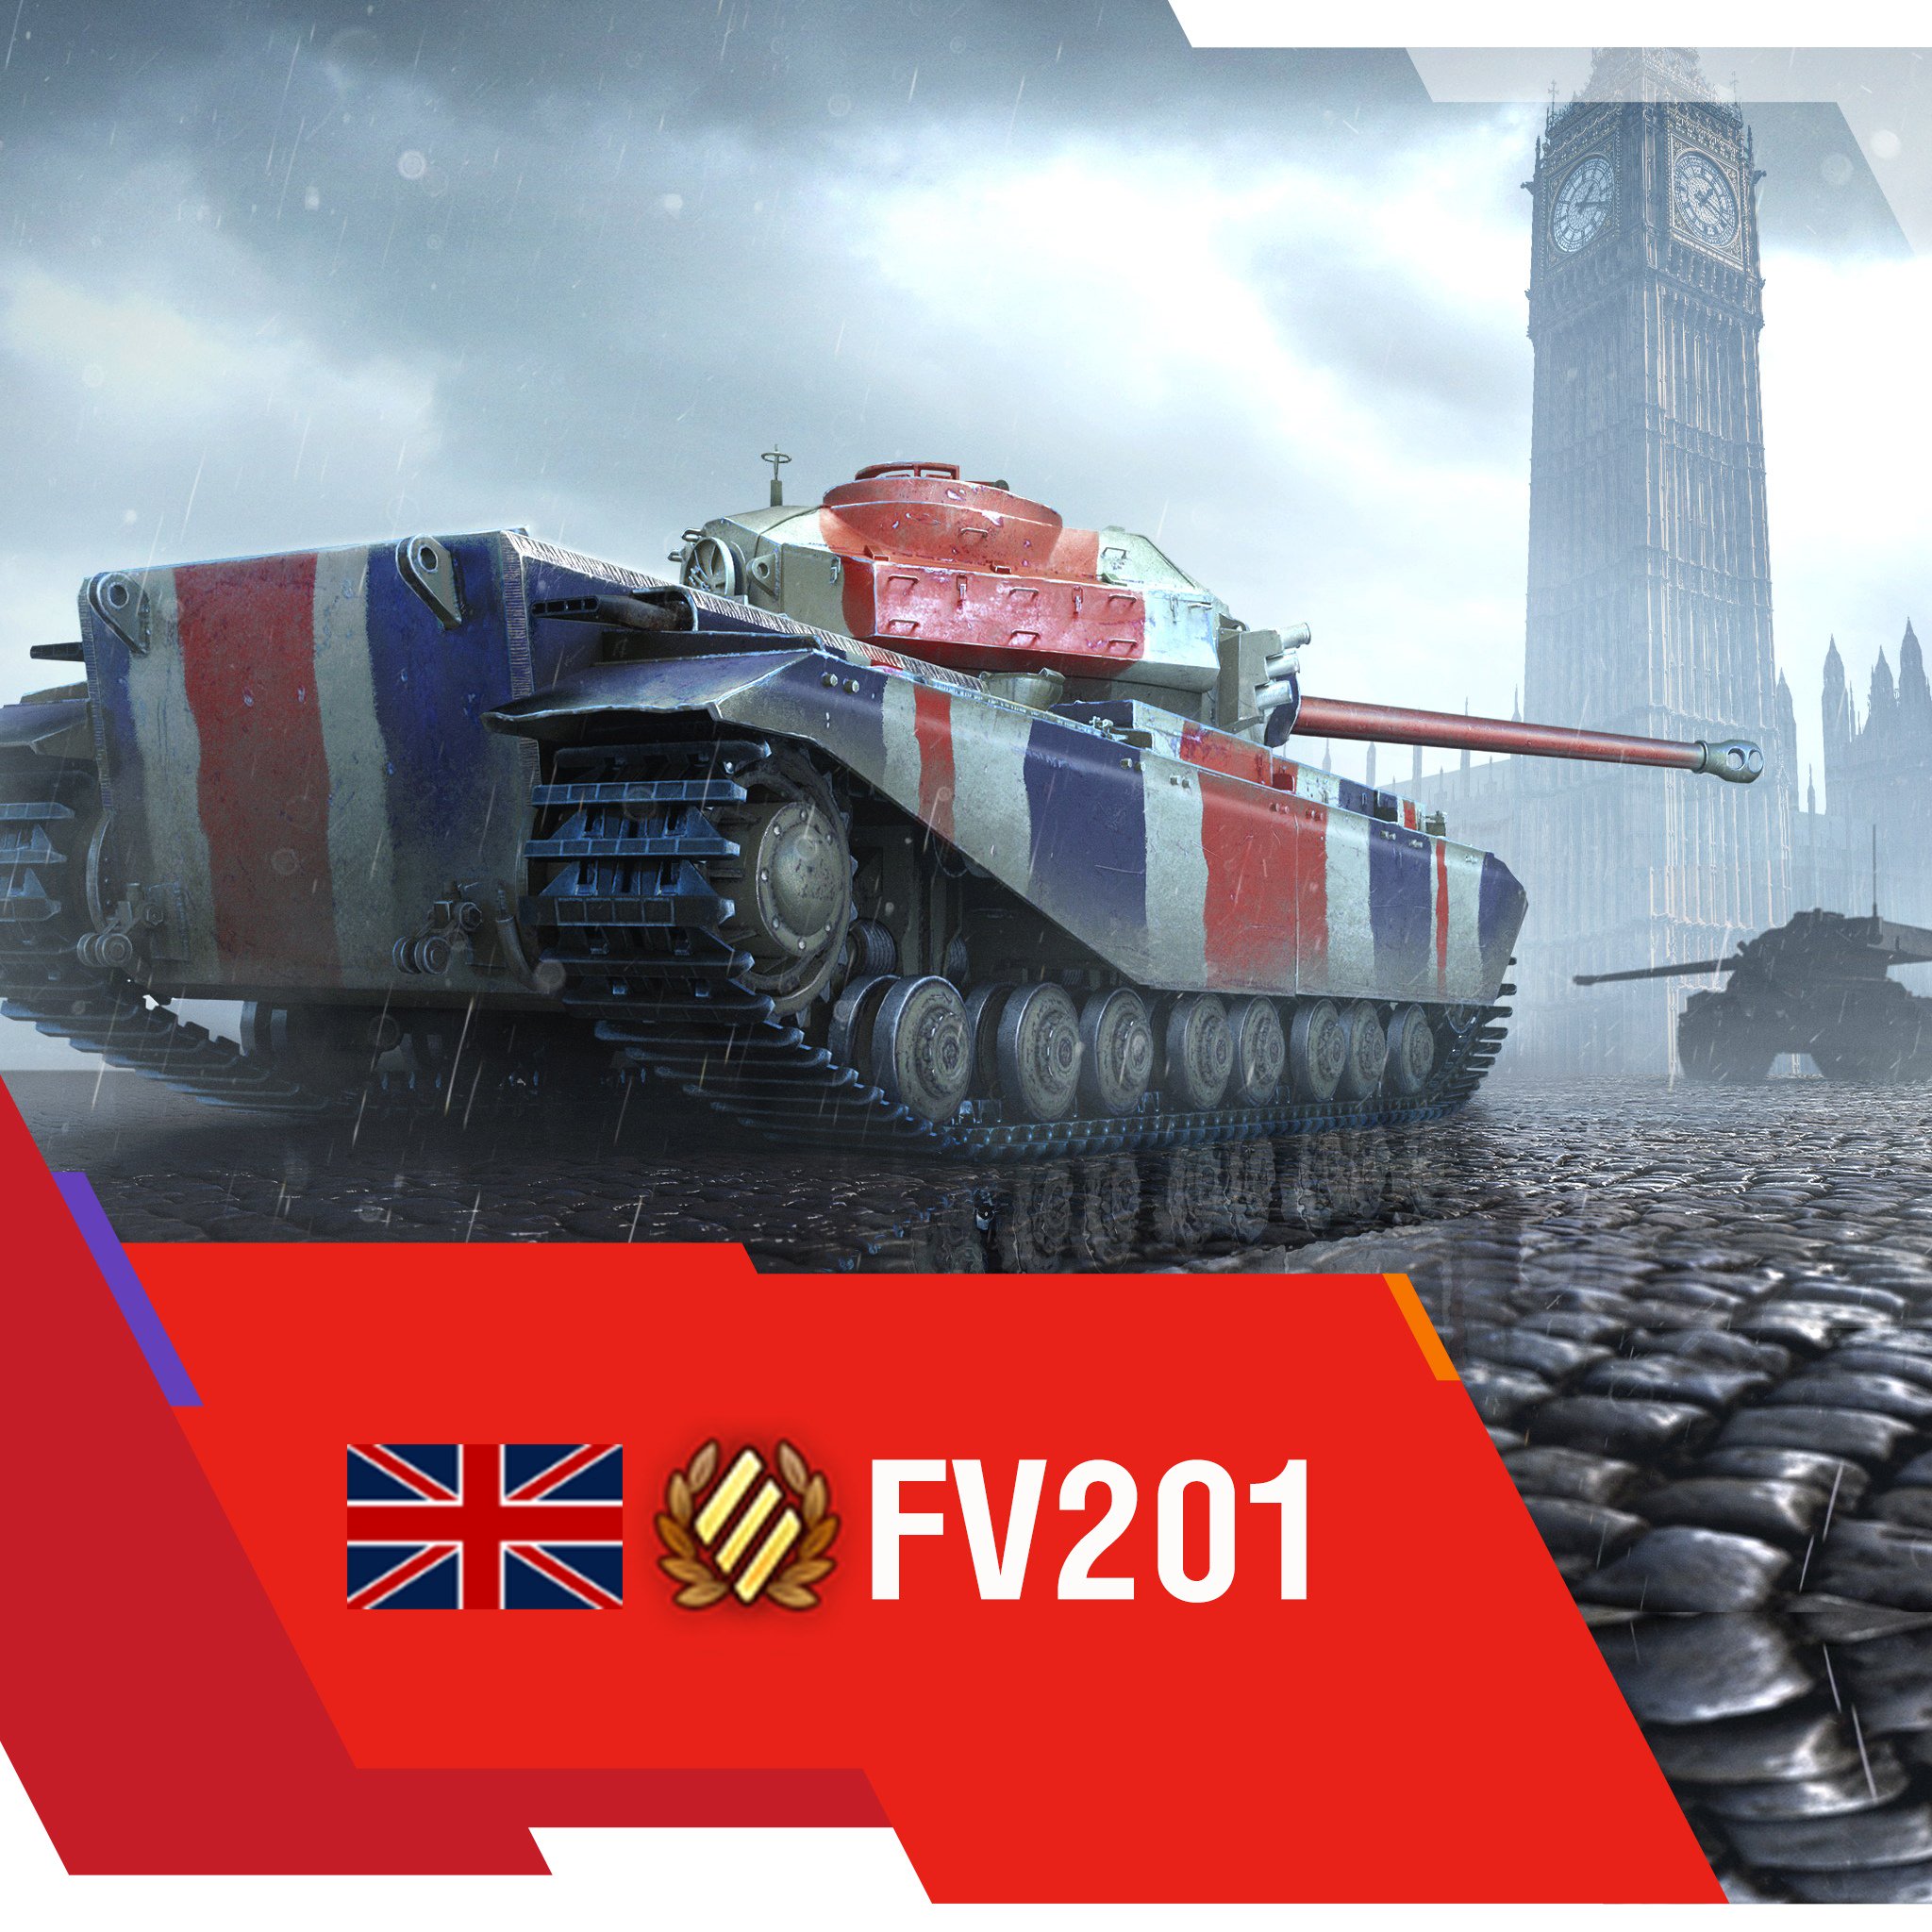 World Of Tanks Blitz Check Out The New Arrivals In The Store American Tier Viii T95e2 Versatile Warrior And British Tier Vii Fv1 5 Heavyweight With The You Rock